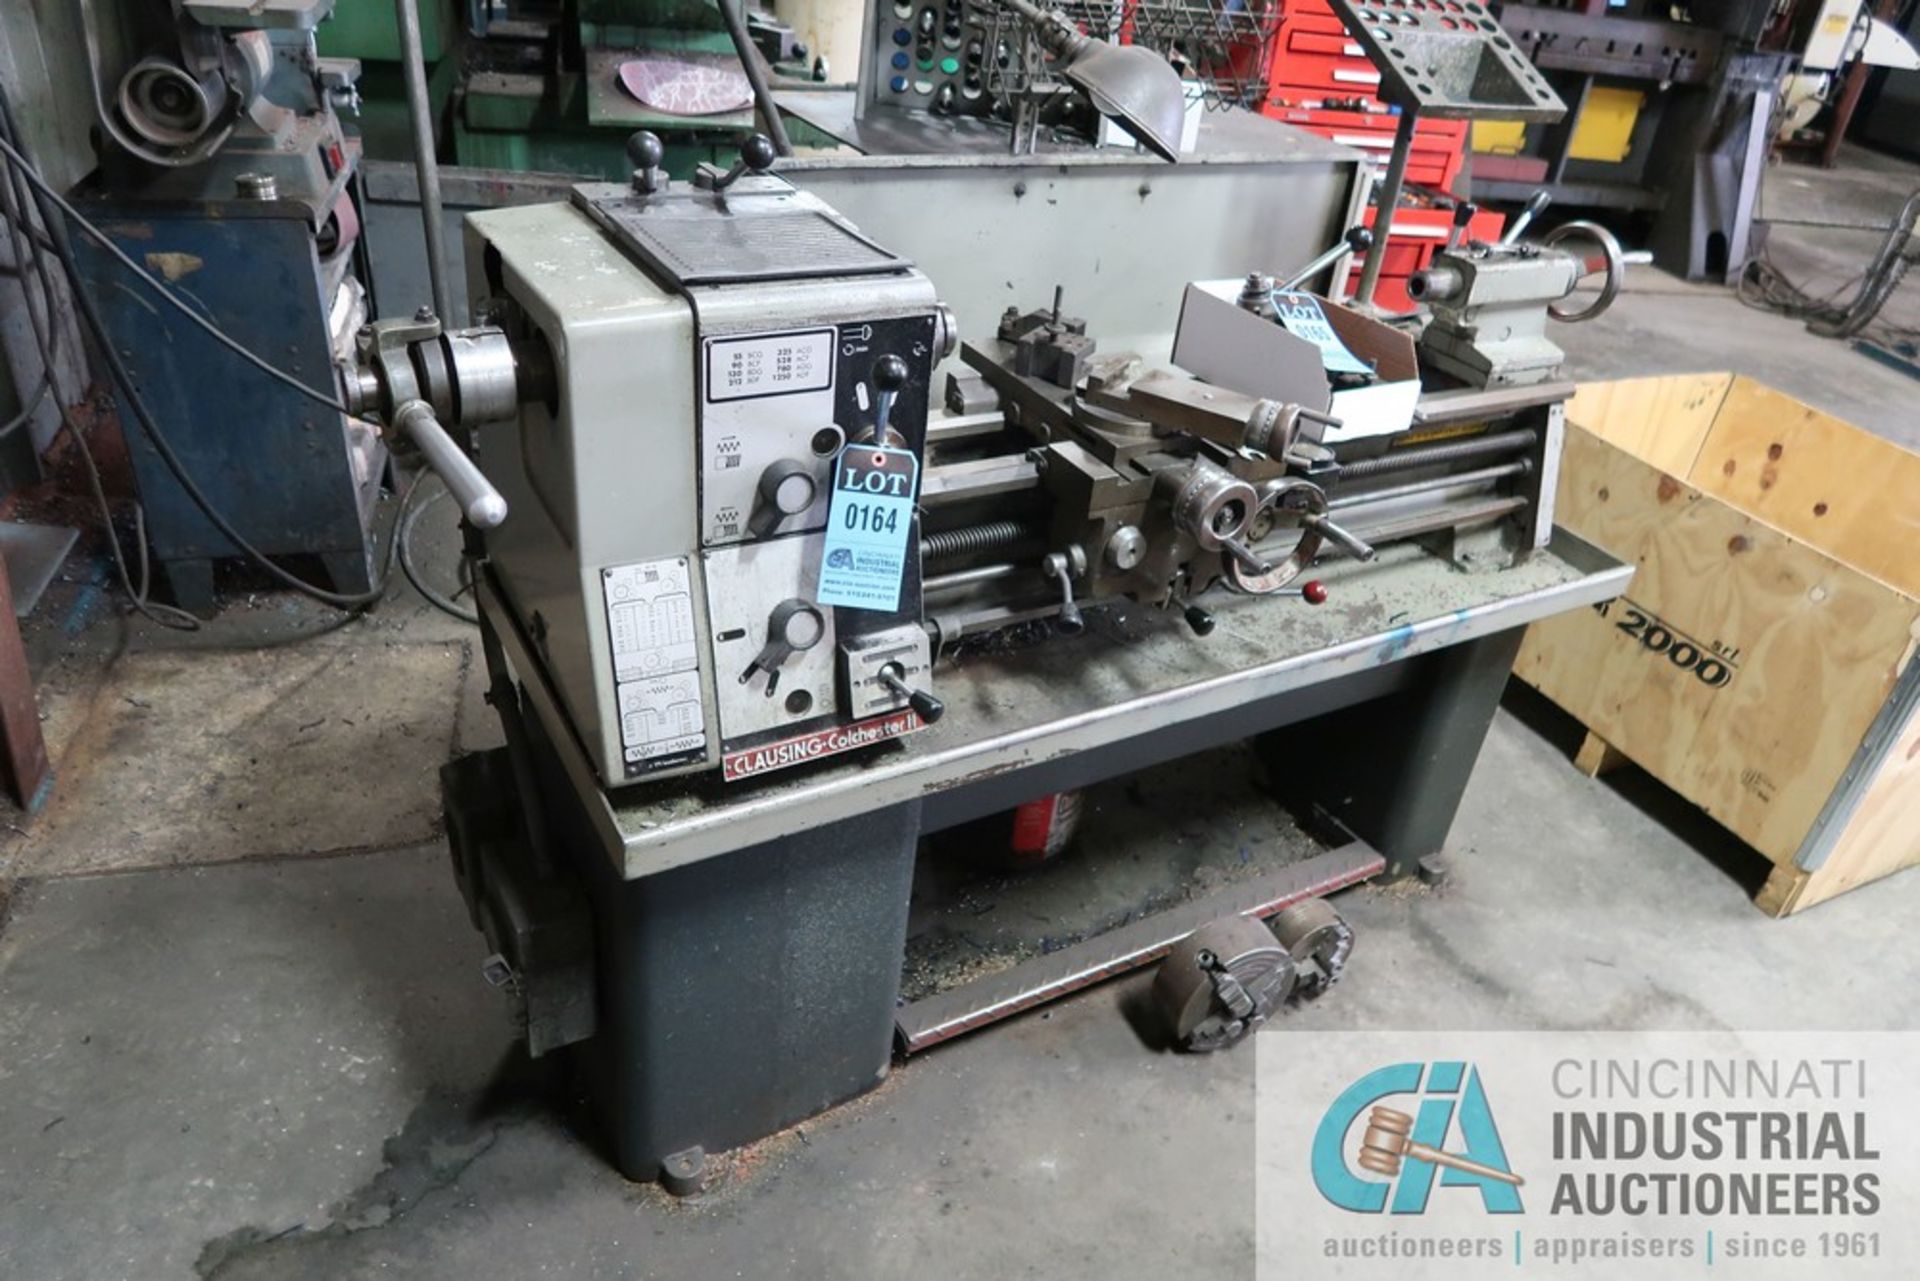 11" X 36" CLAUSING-COLCHESTER TOOLROOM LATHE; S/N 20-0021-01207, 1" SPINDLE HOLE, SPINDLE SPEEDS - Image 2 of 8